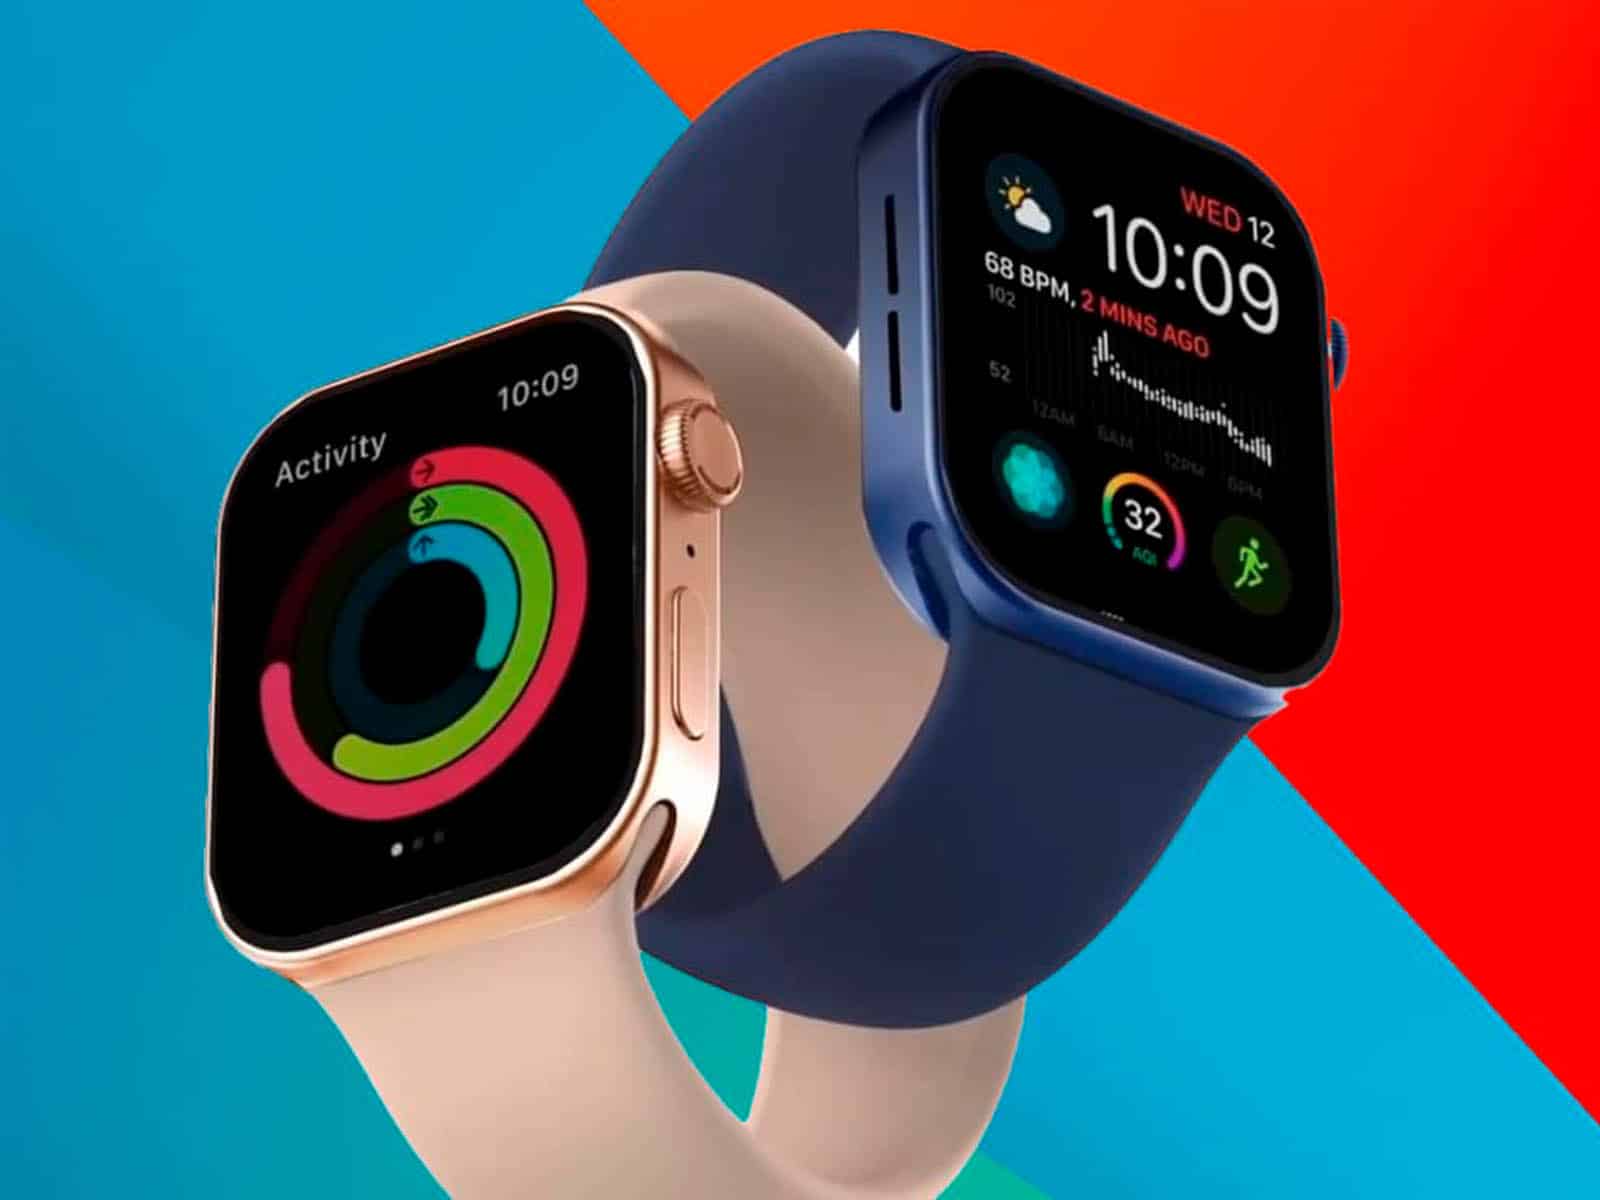 The Apple Watch Series 8 will be able to detect if you have a fever